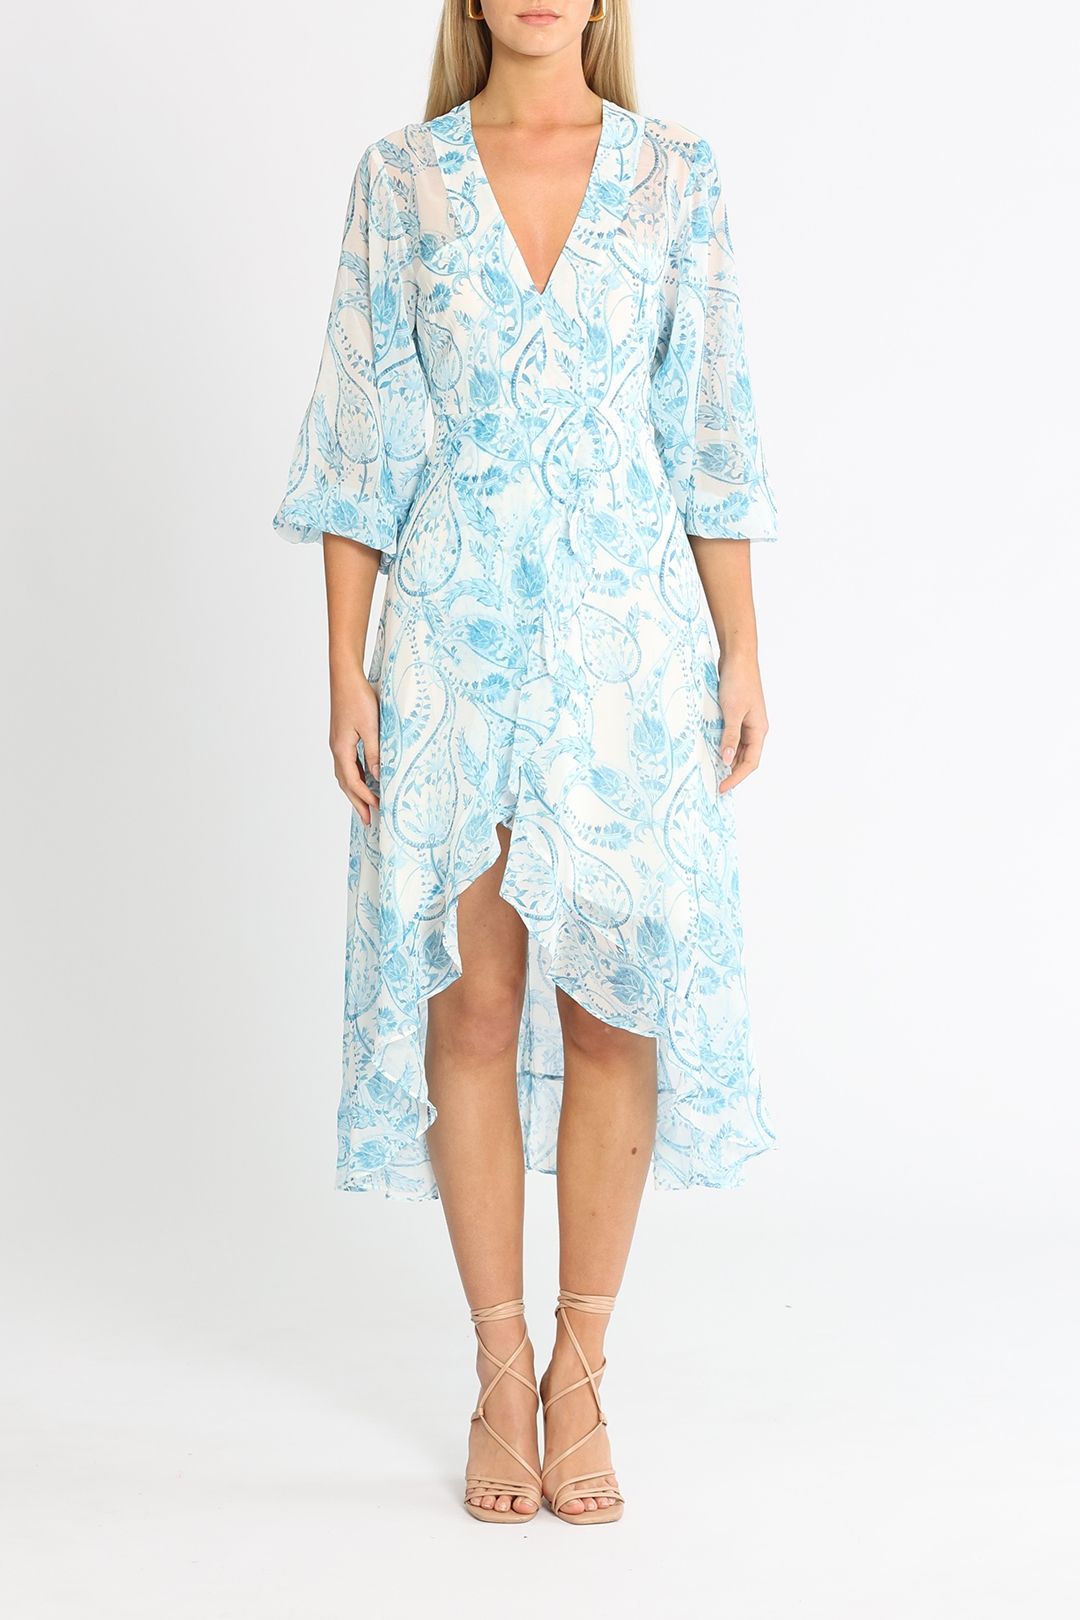 Belle and Bloom Beautiful Escape Dress Blue